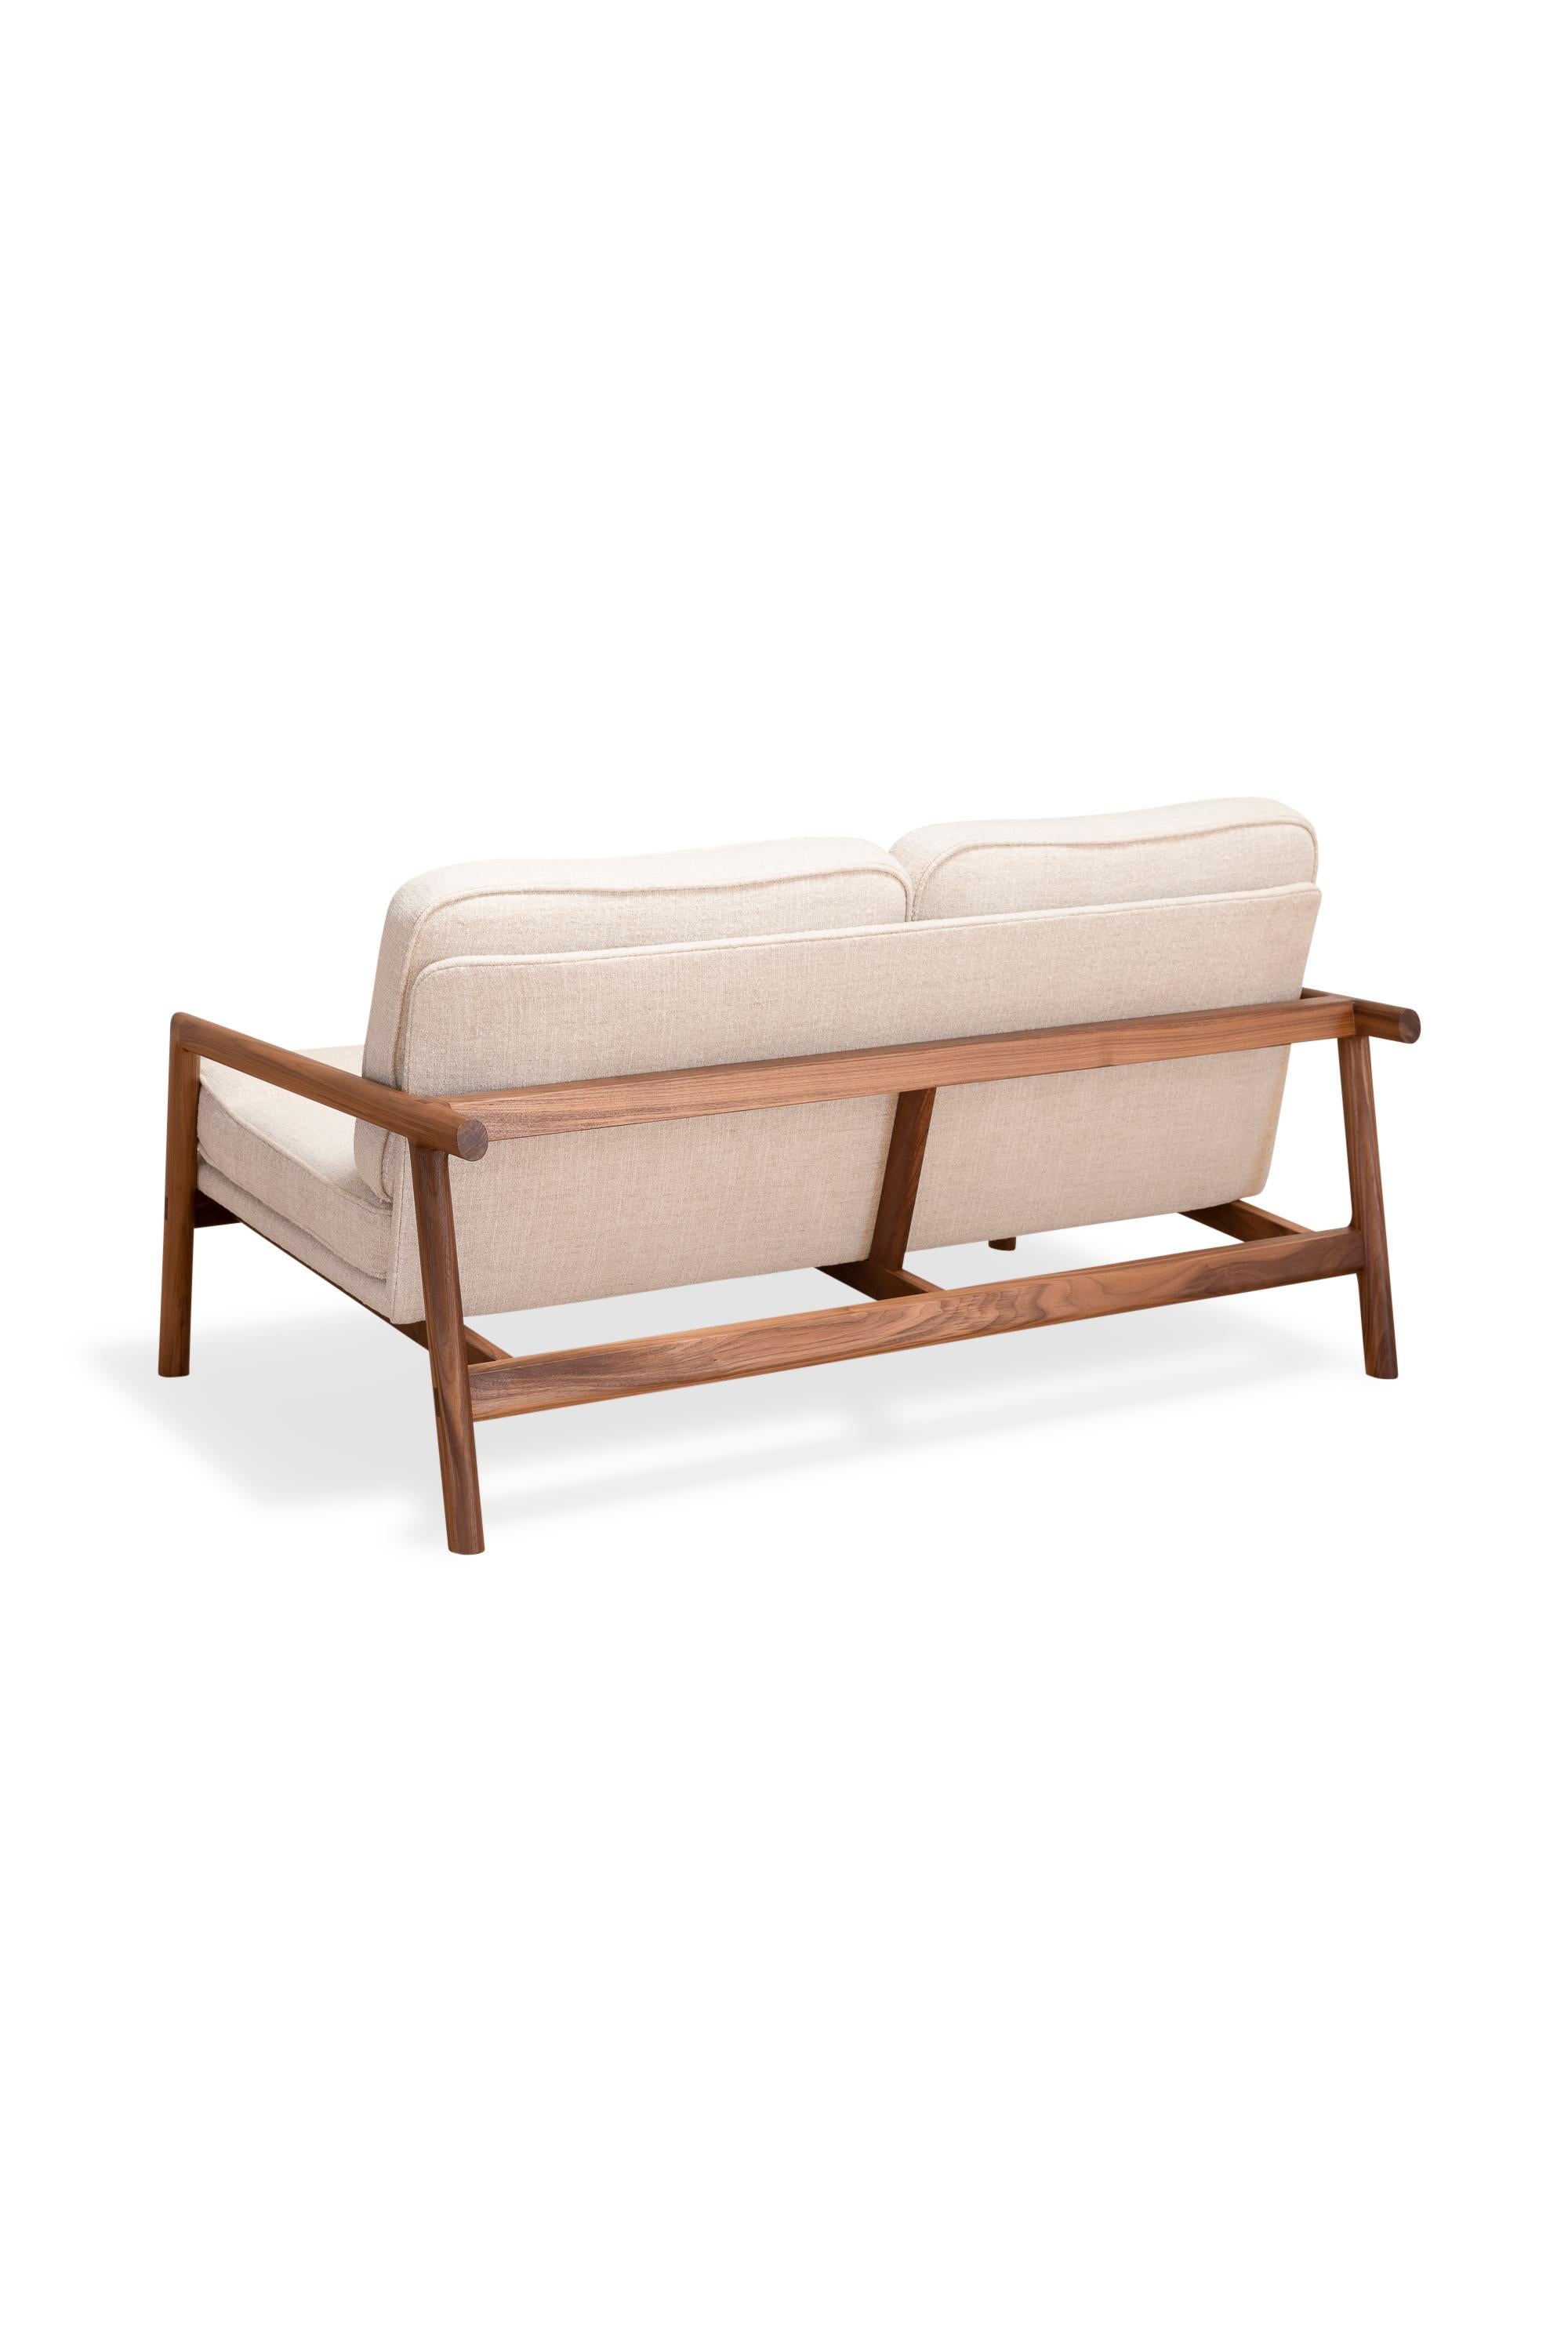 Hand-Crafted EARL Handcrafted Walnut Moresby Loveseat with Custom Linen or Leather Upholstery For Sale